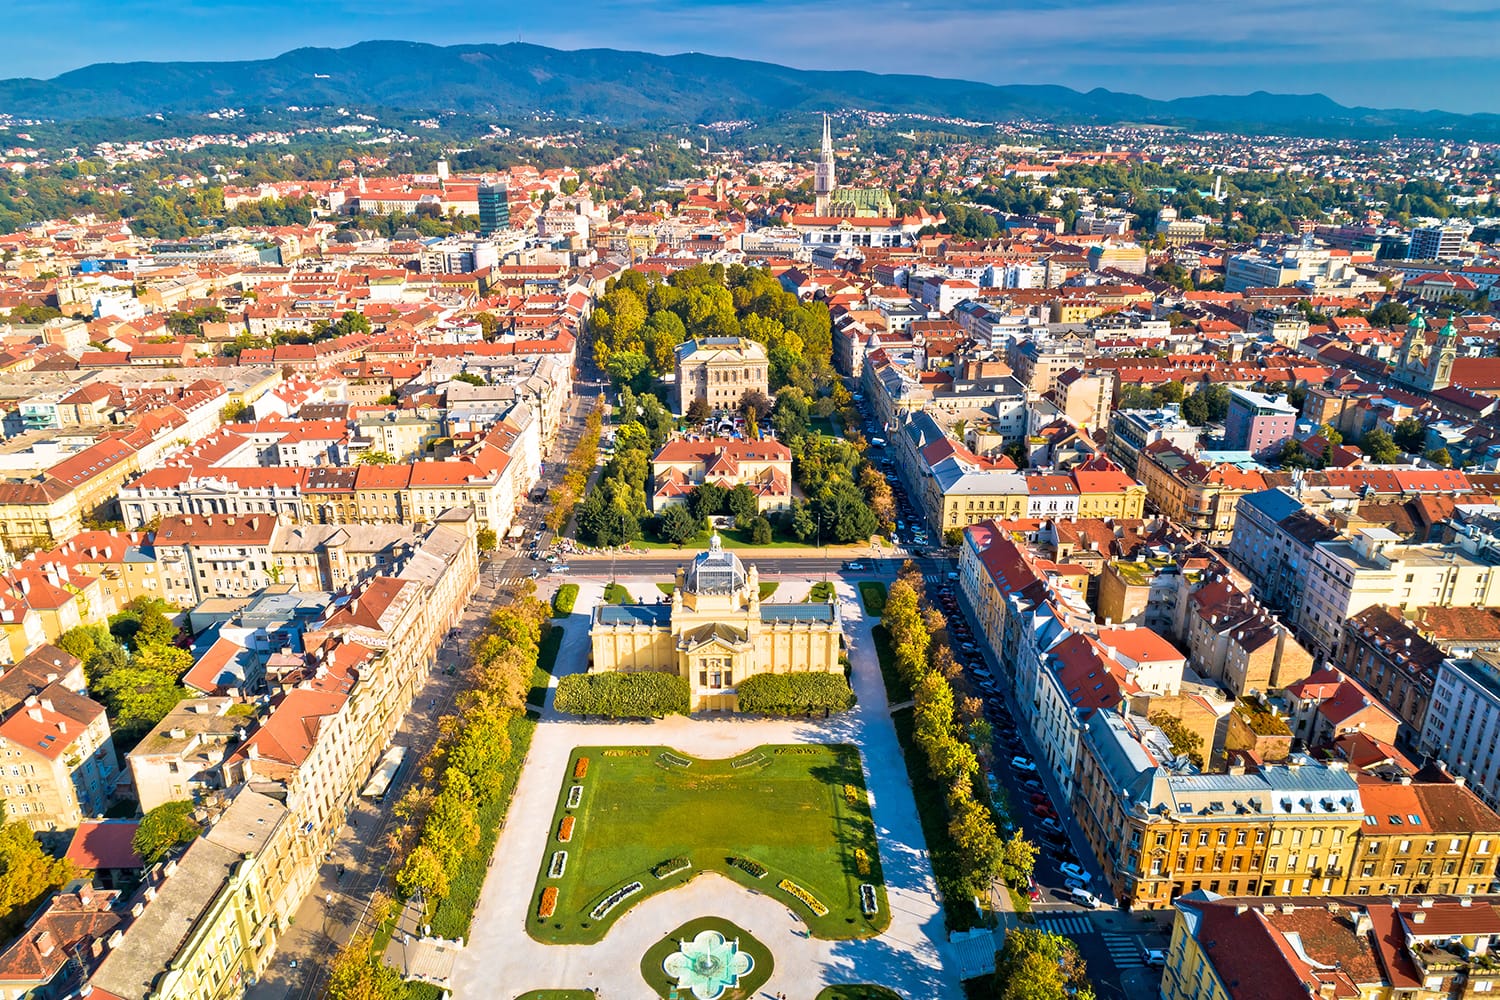 Zagreb historic city center aerial view, famous landmarks of capital of Croatia